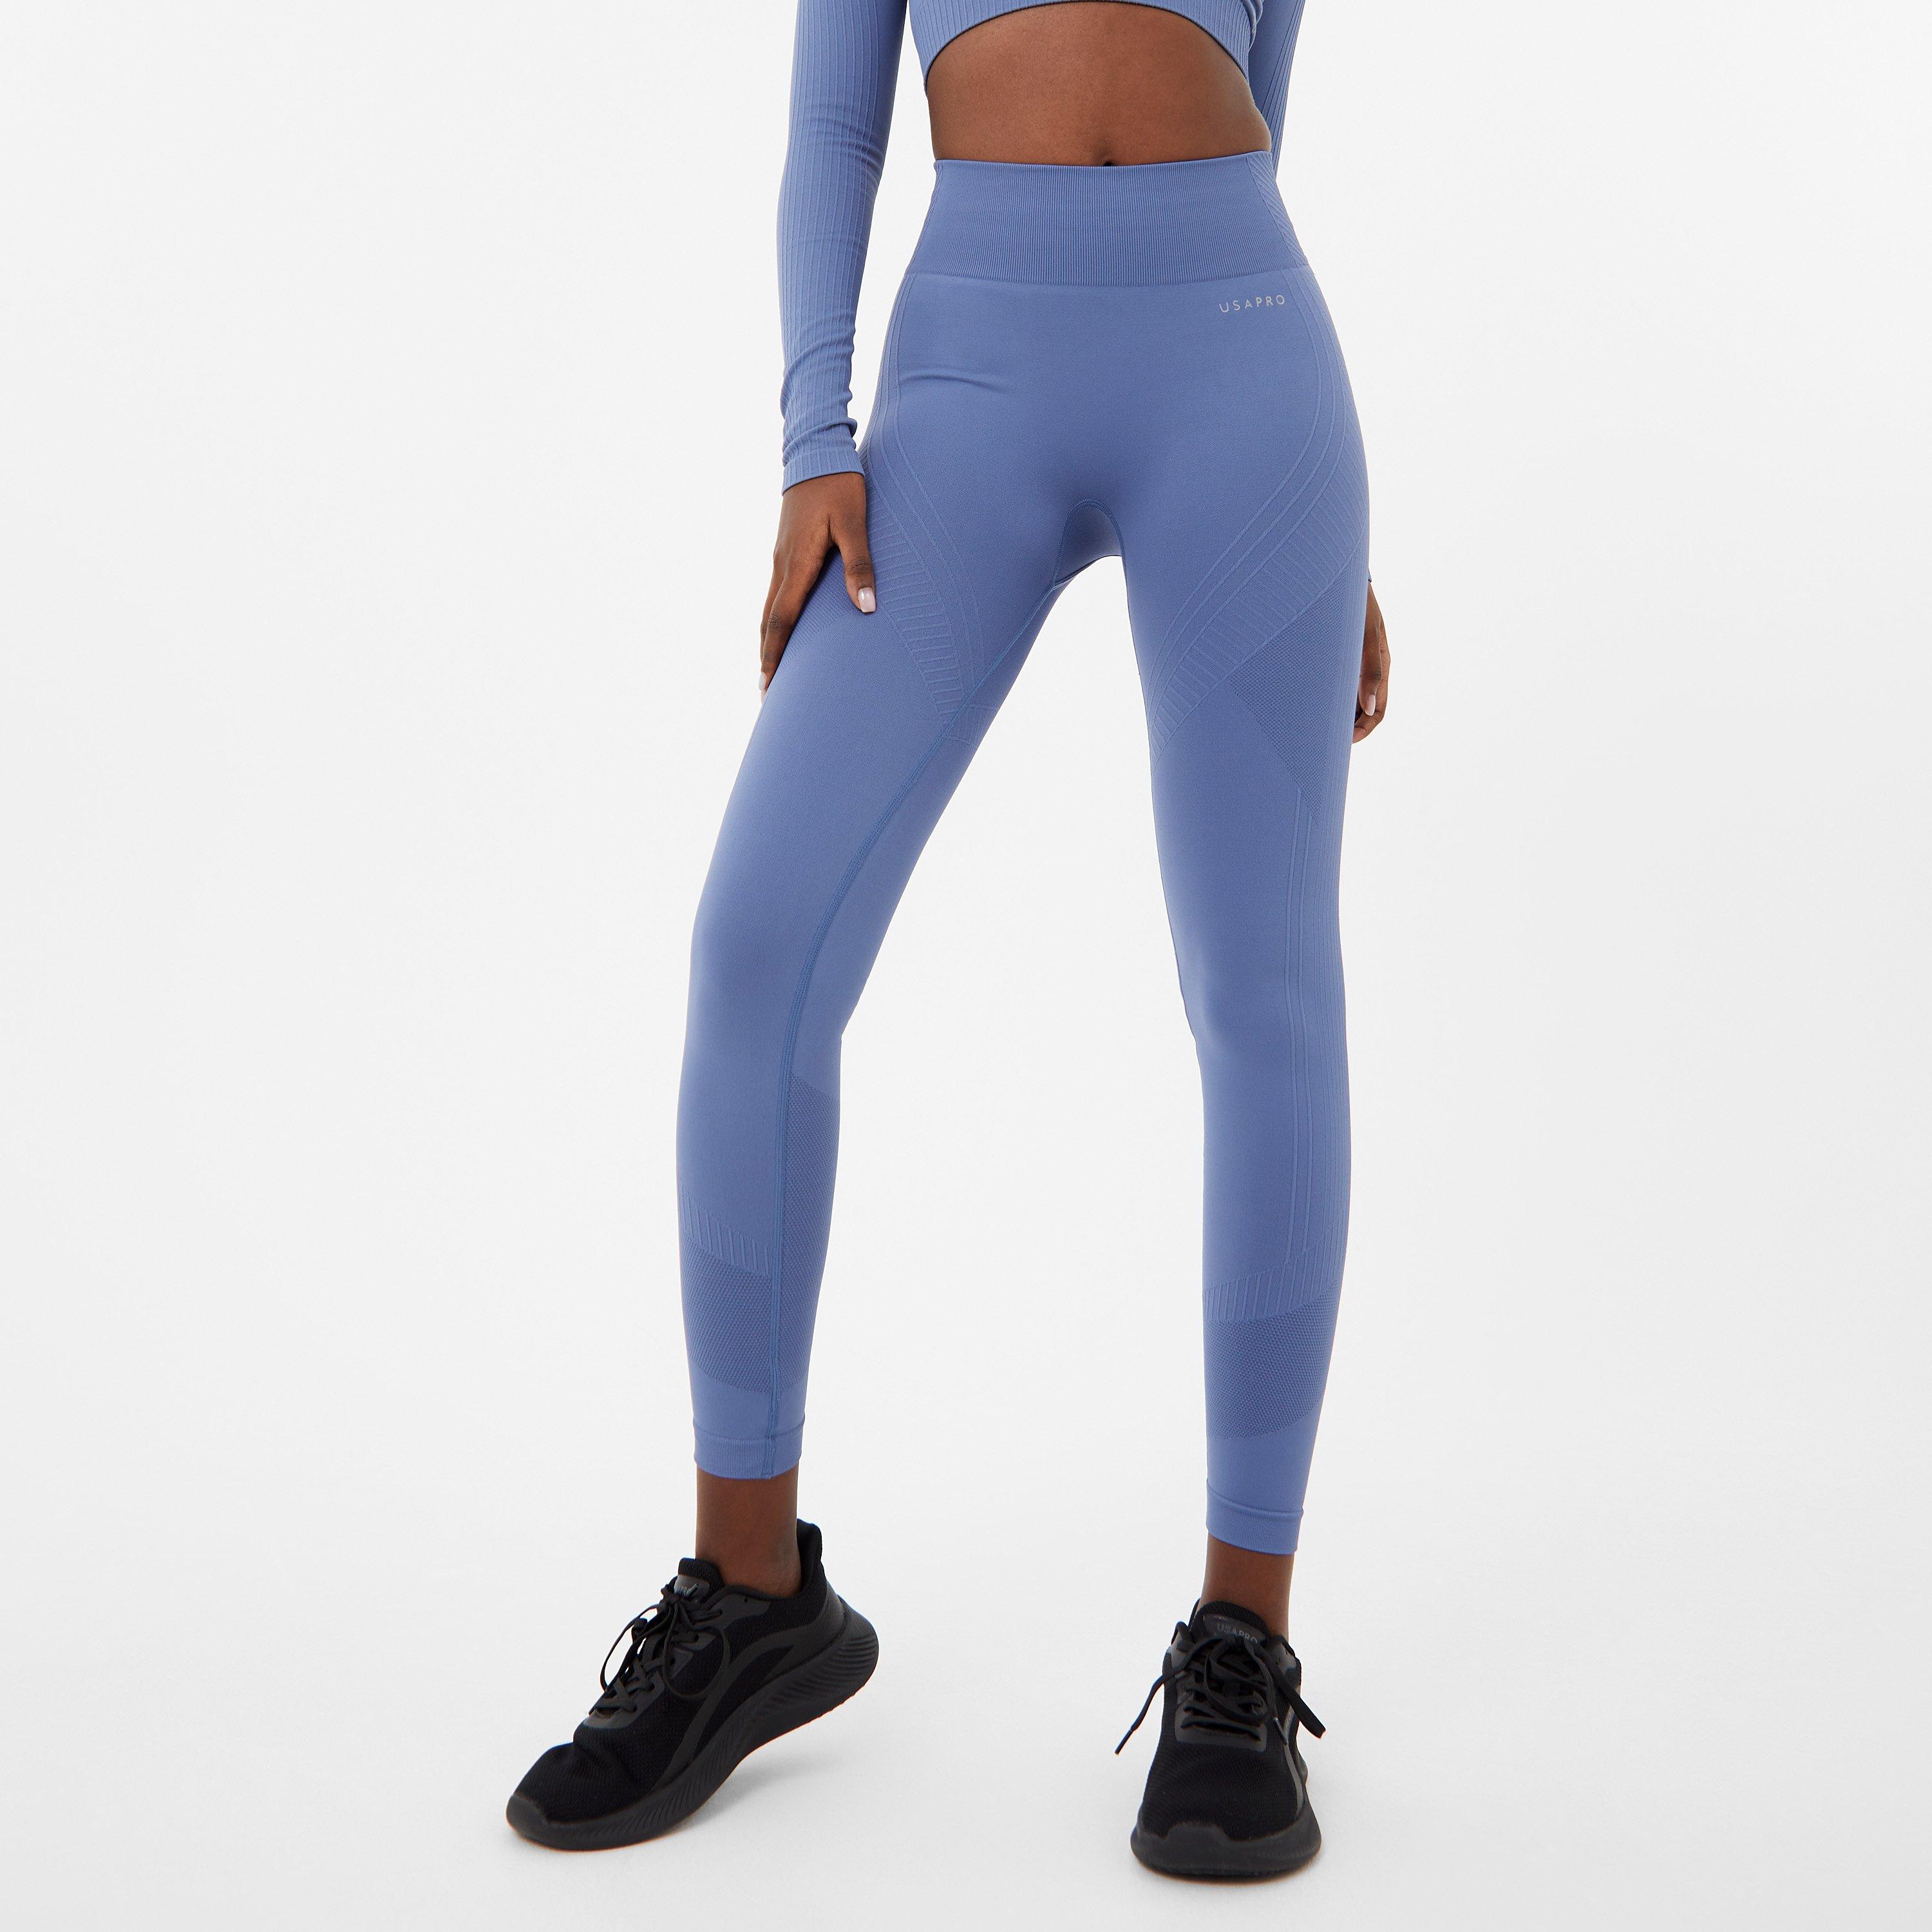 Gymshark Women's Activewear for sale in West Columbia, South